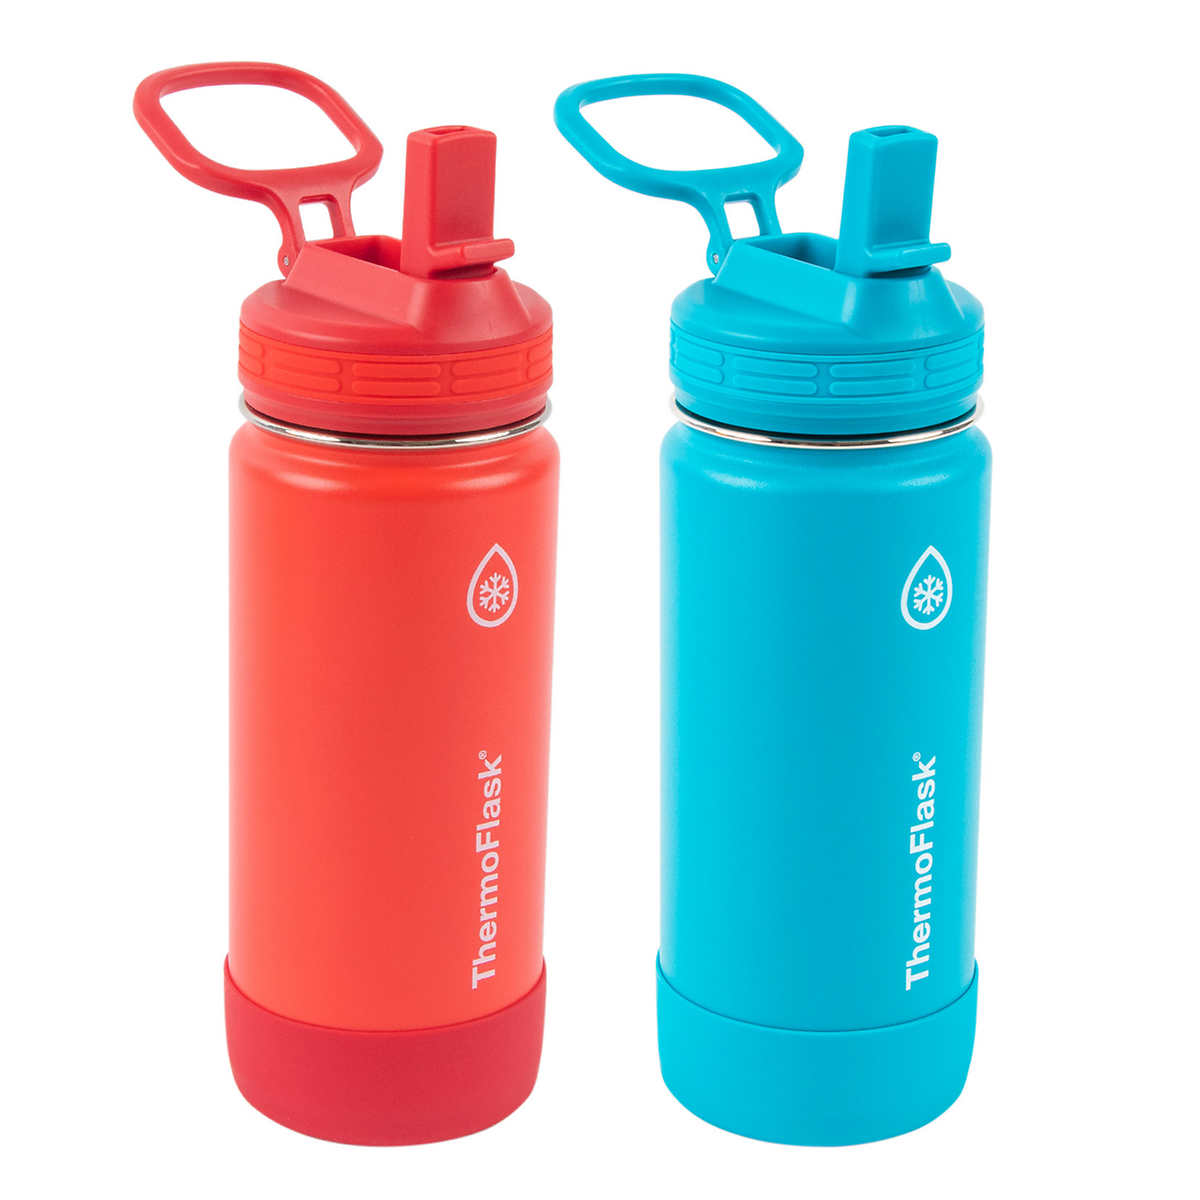 ⚡️ Thermoflask Motivational Water Bottle 2-Packs from Costco are PERFE, Thermoflask